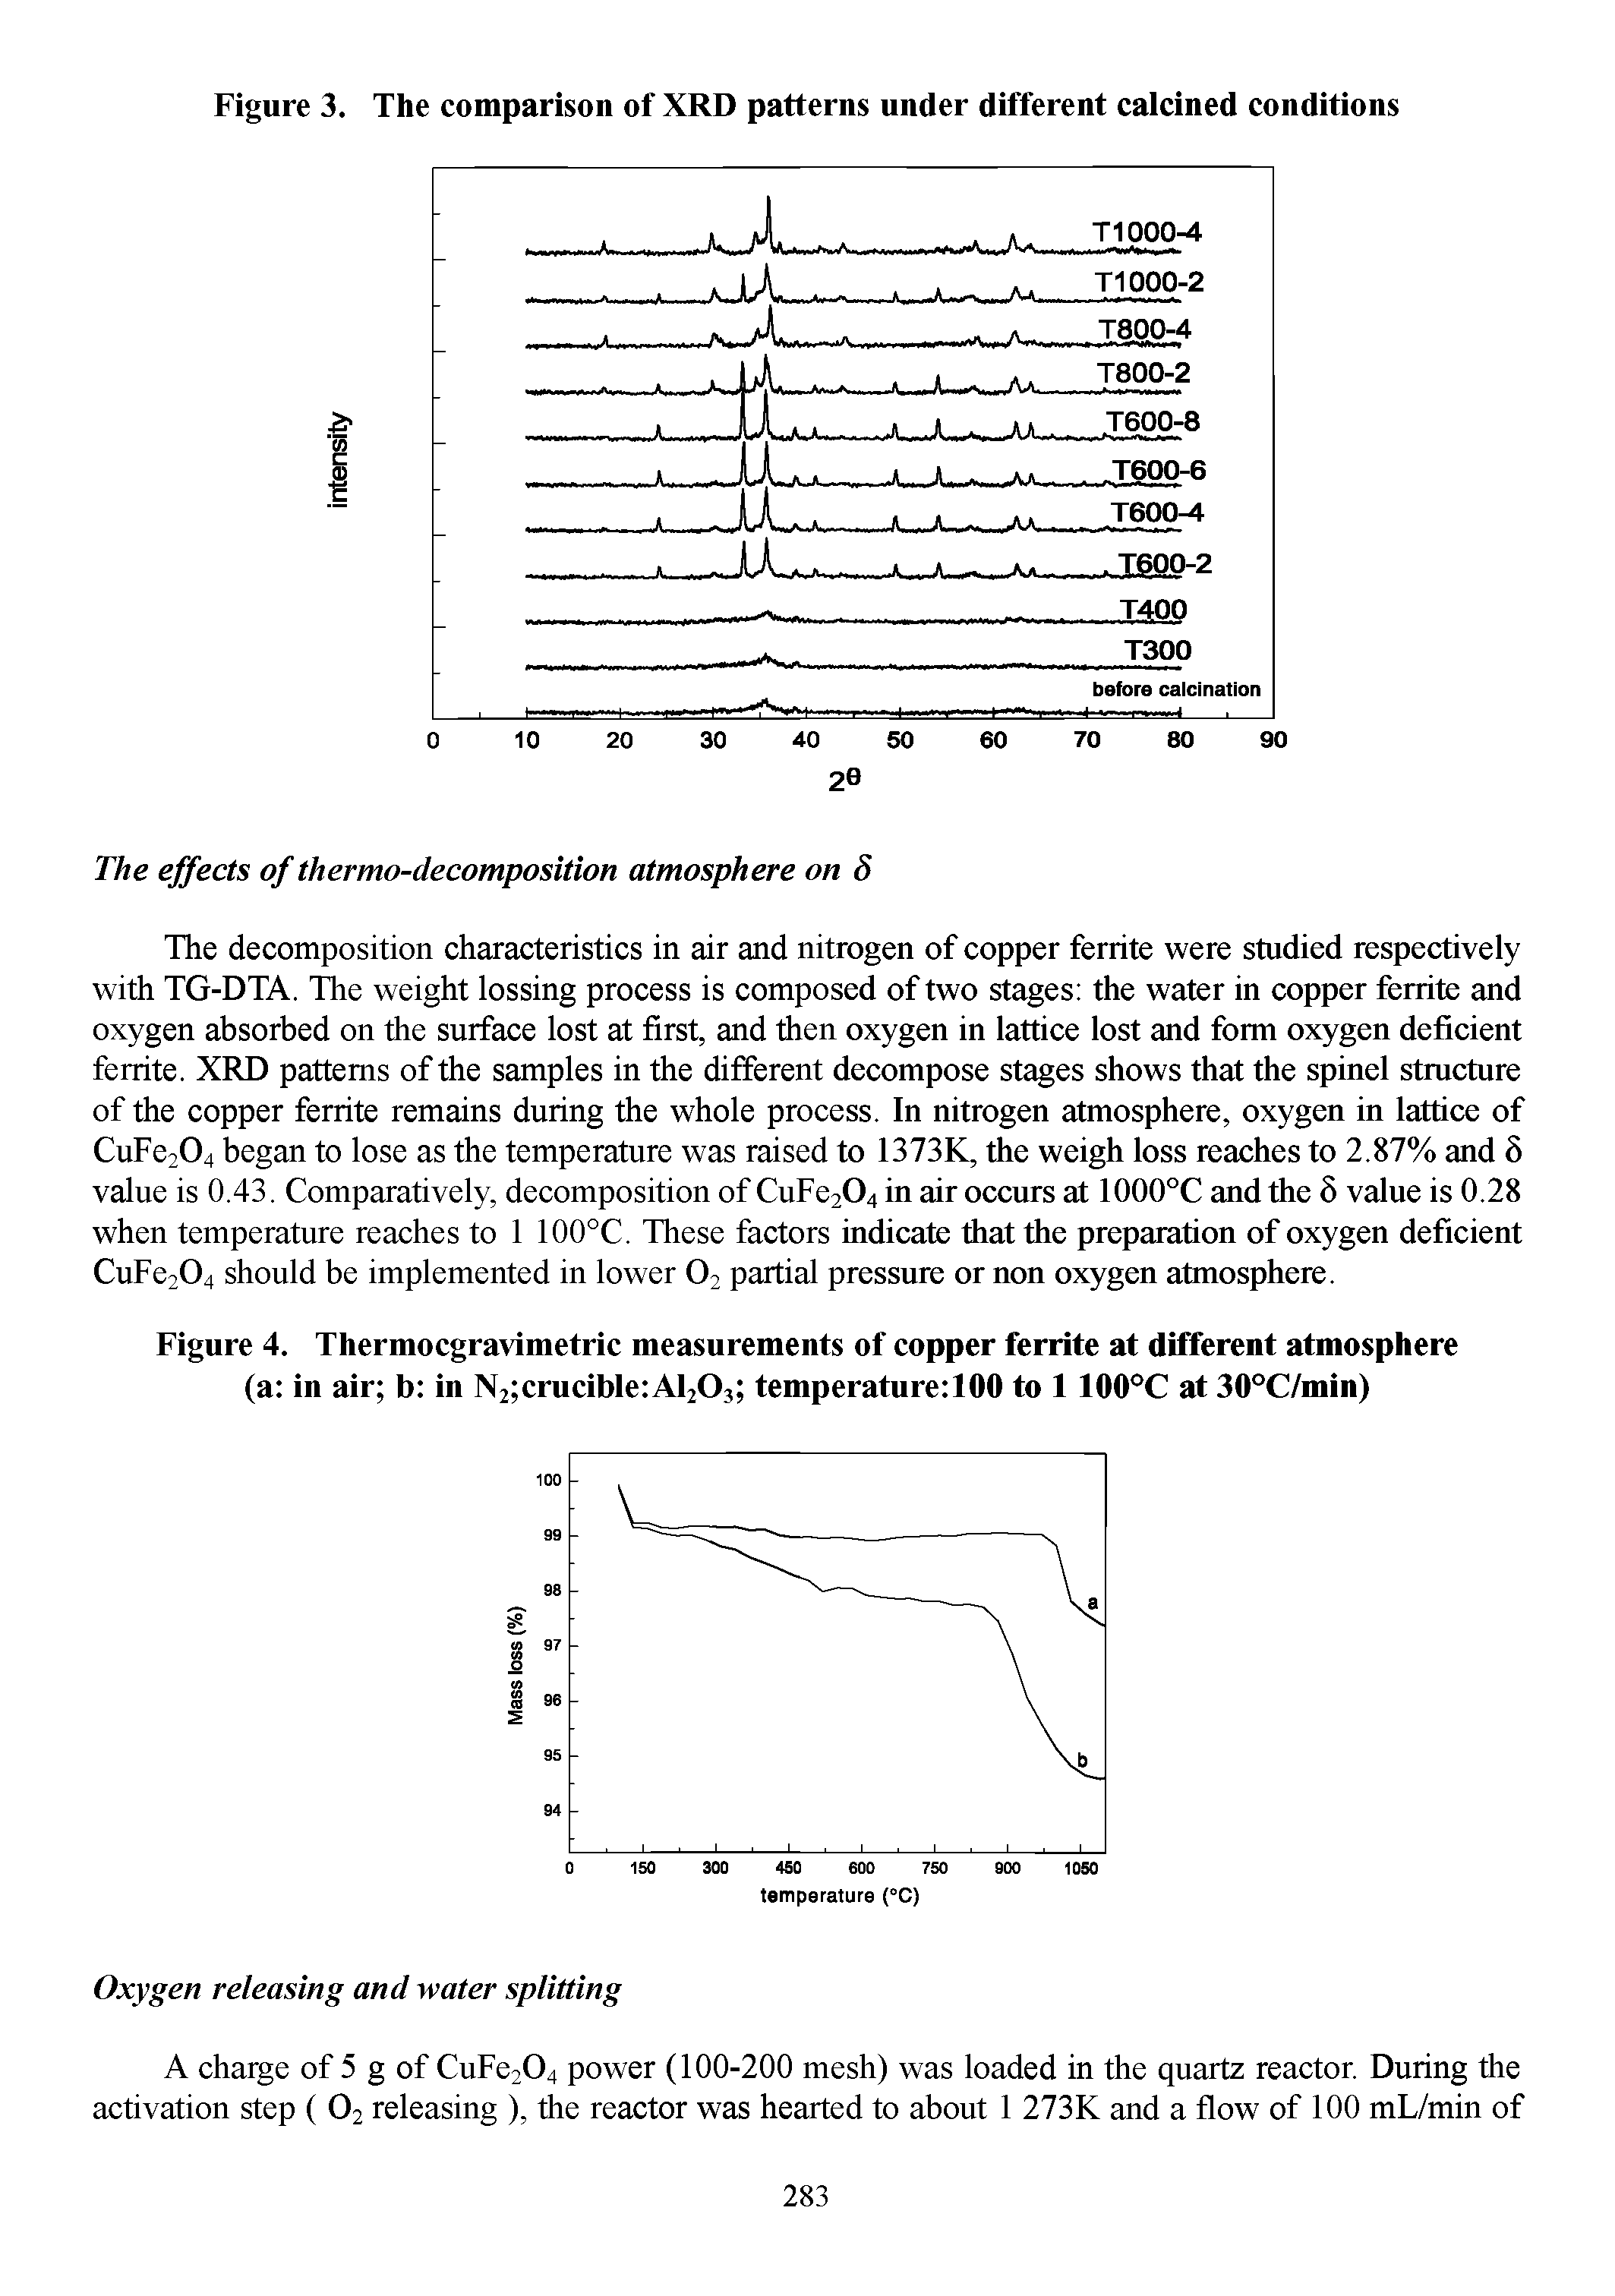 Figure 4. Tliermocgravimetric measurements of copper ferrite at different atmosphere (a in air b in 2 crucible AI,(), temperature 100 to 1 IOO°C at 30°C/min)...